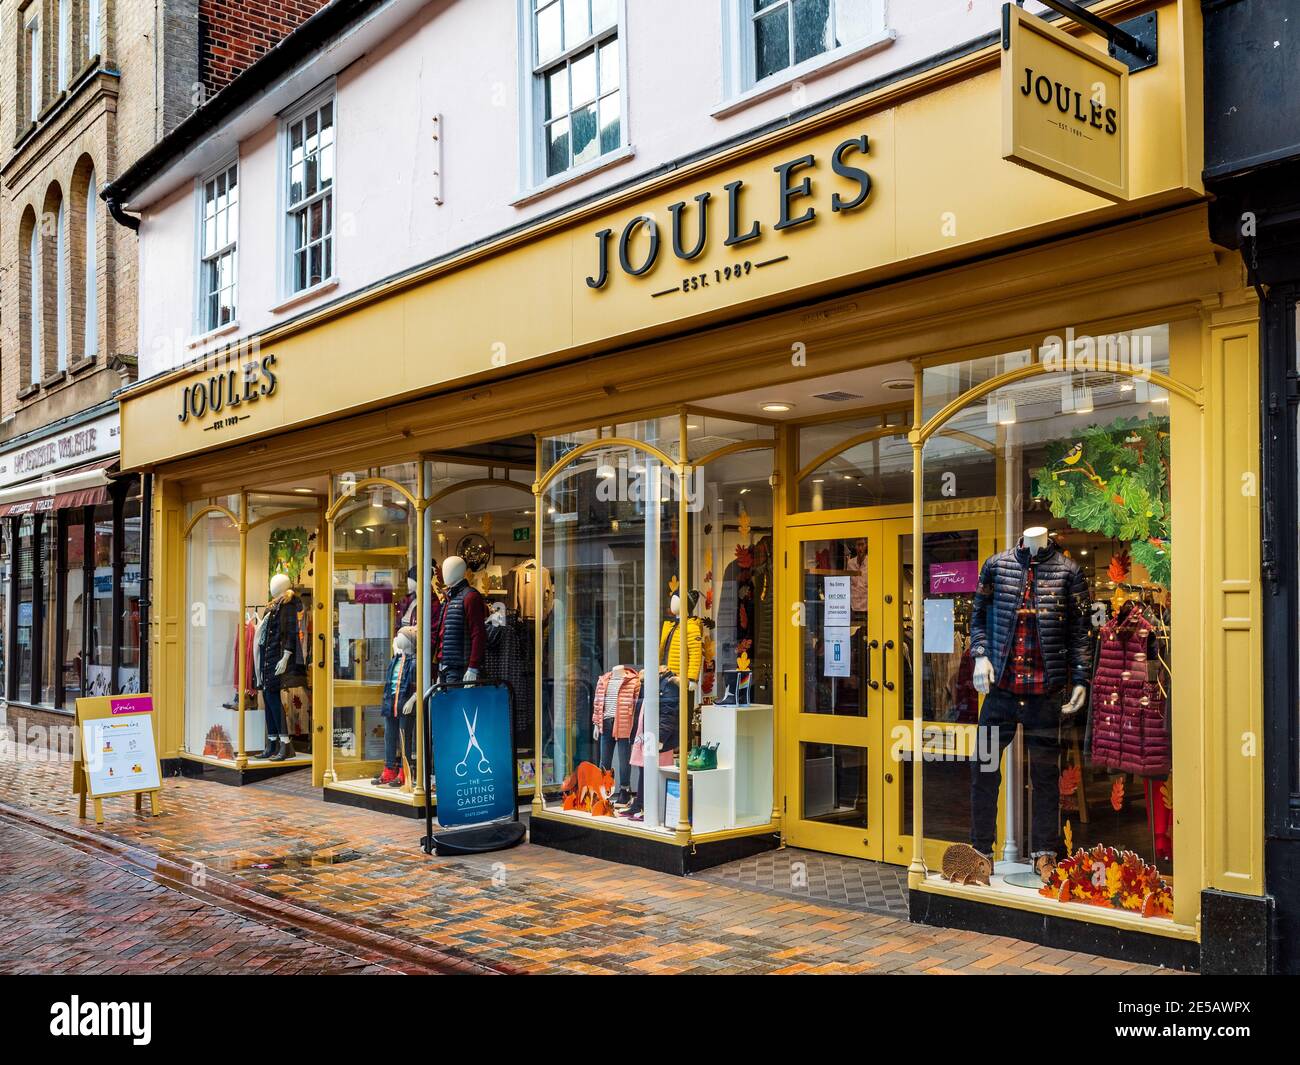 Joules Store - Joules Shop in Ipswich UK - Joules is a UK based clothing chain selling country lifestyle clothing. founded 1989 by Tom Joule. Stock Photo